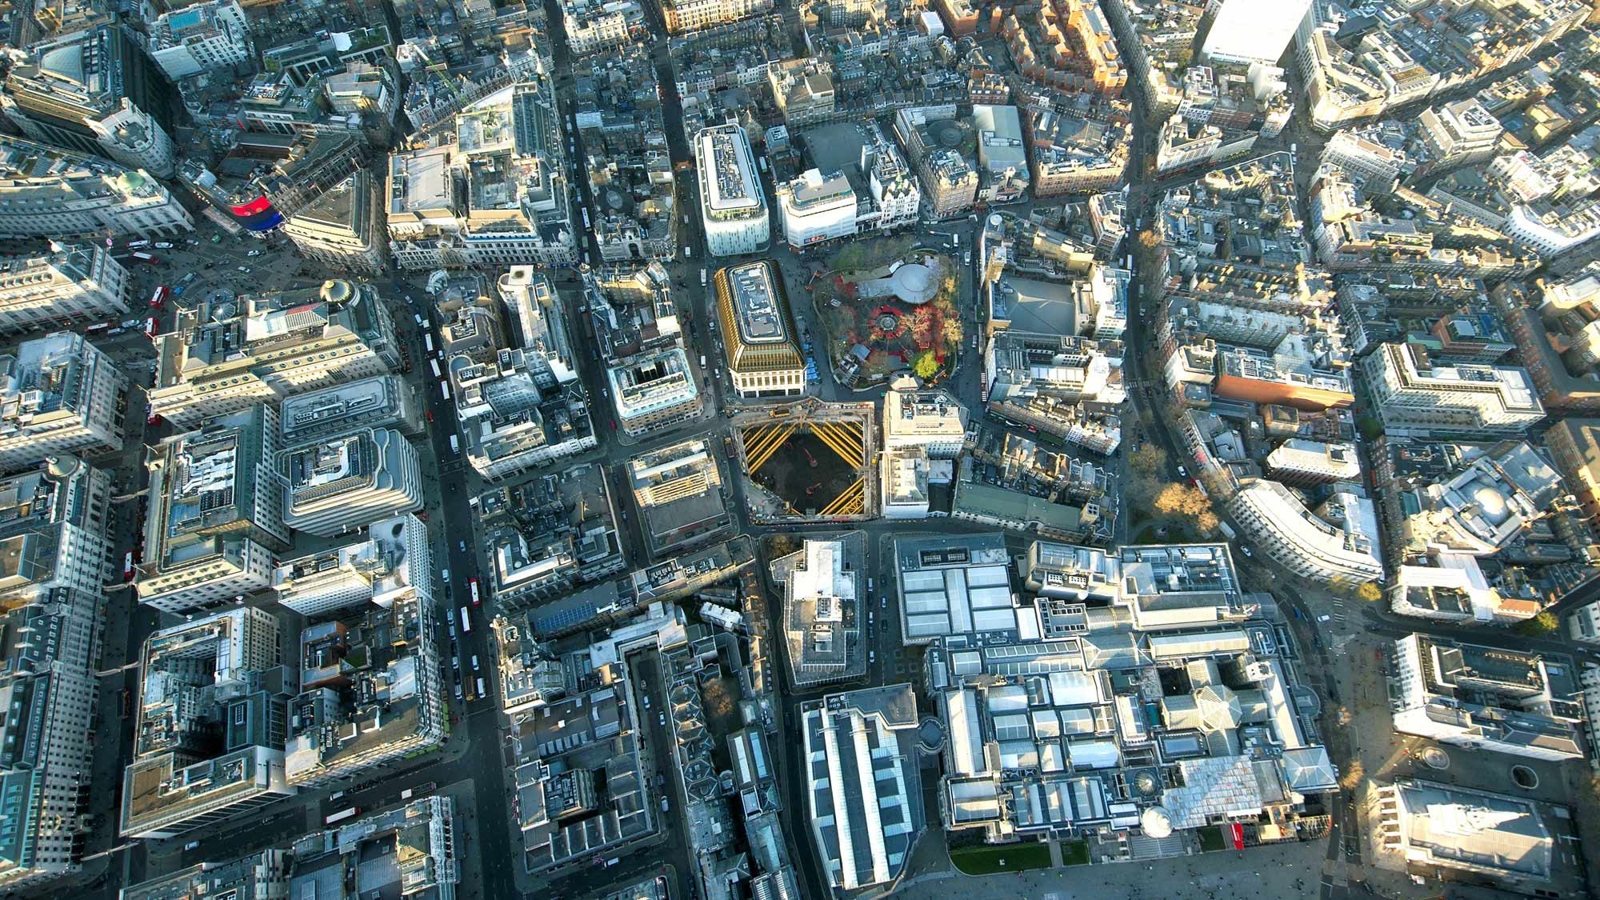 The site of The Londoner seen from the sky